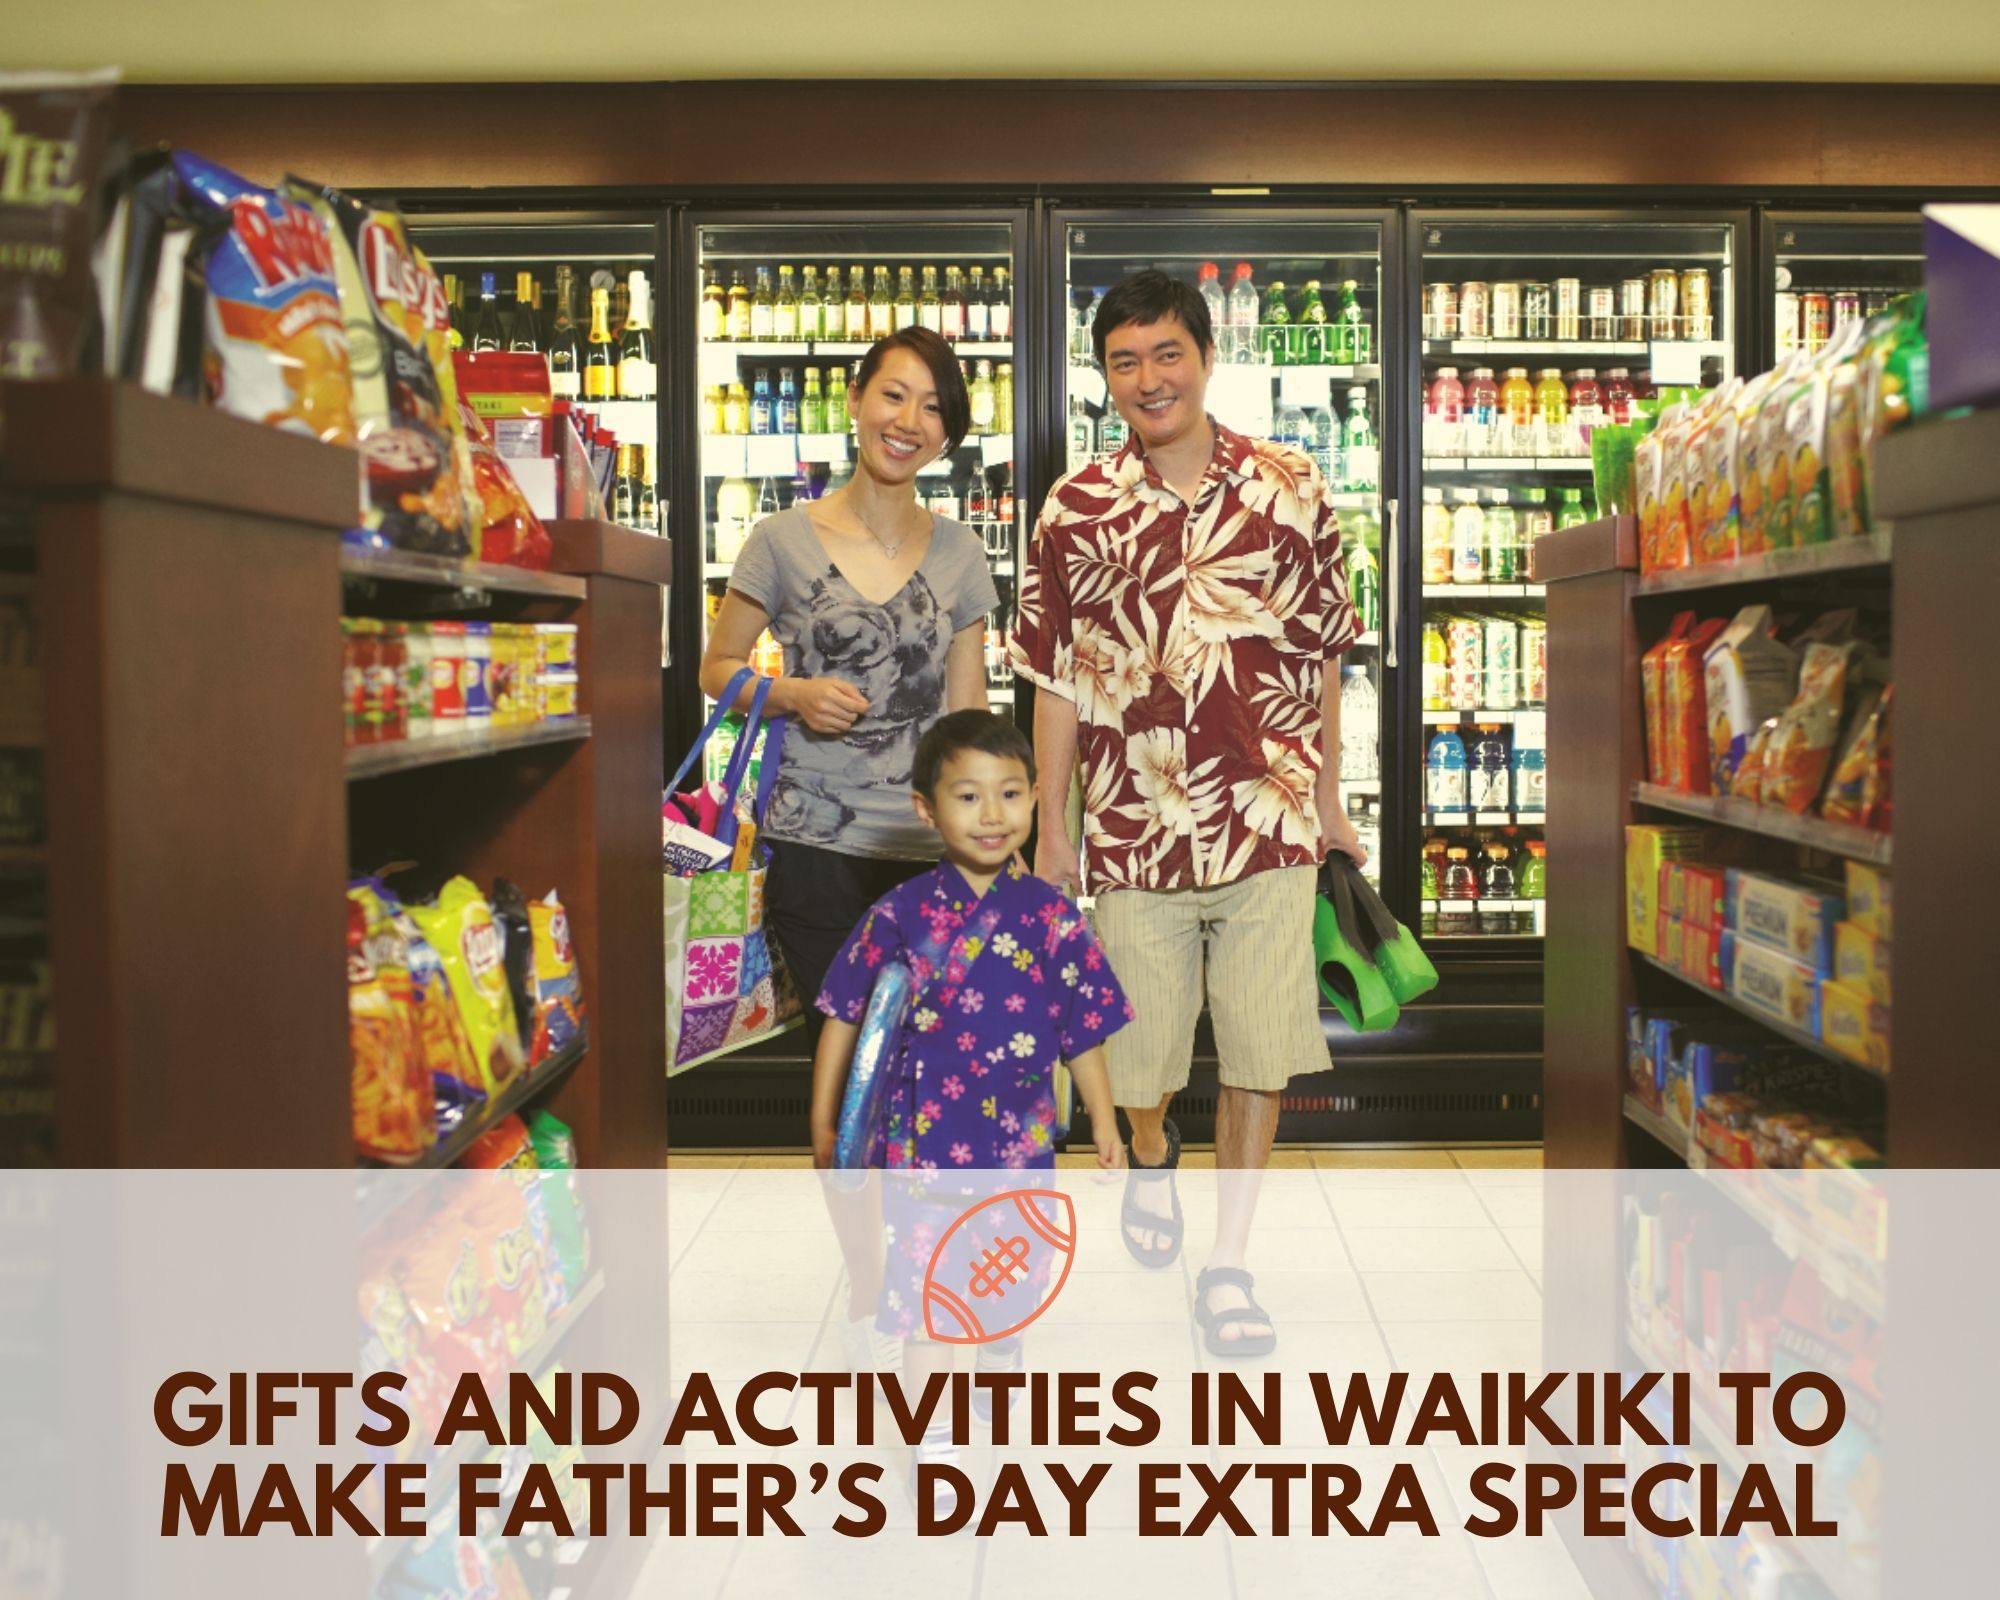 Gifts and Activities in Waikiki to Make Father’s Day Extra Special